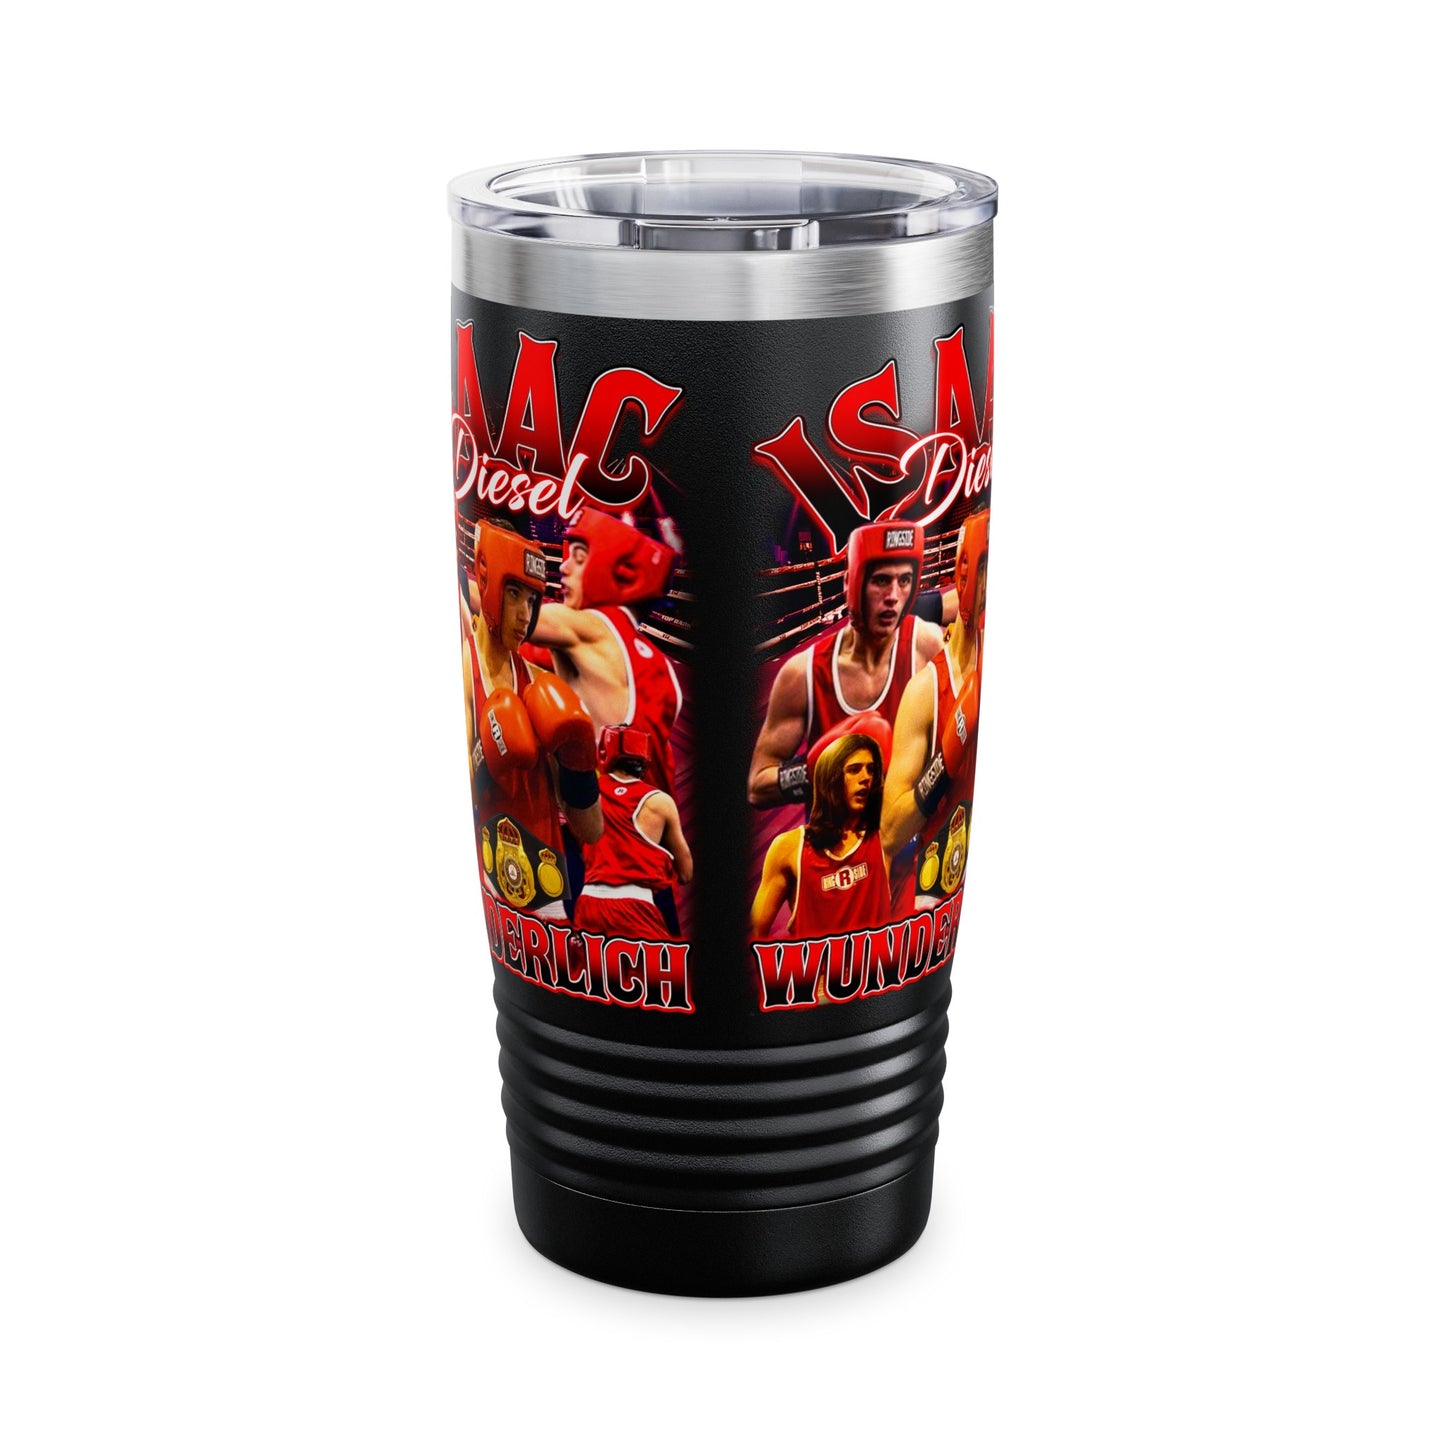 Isaac Wunderlich Stainless Steal Tumbler